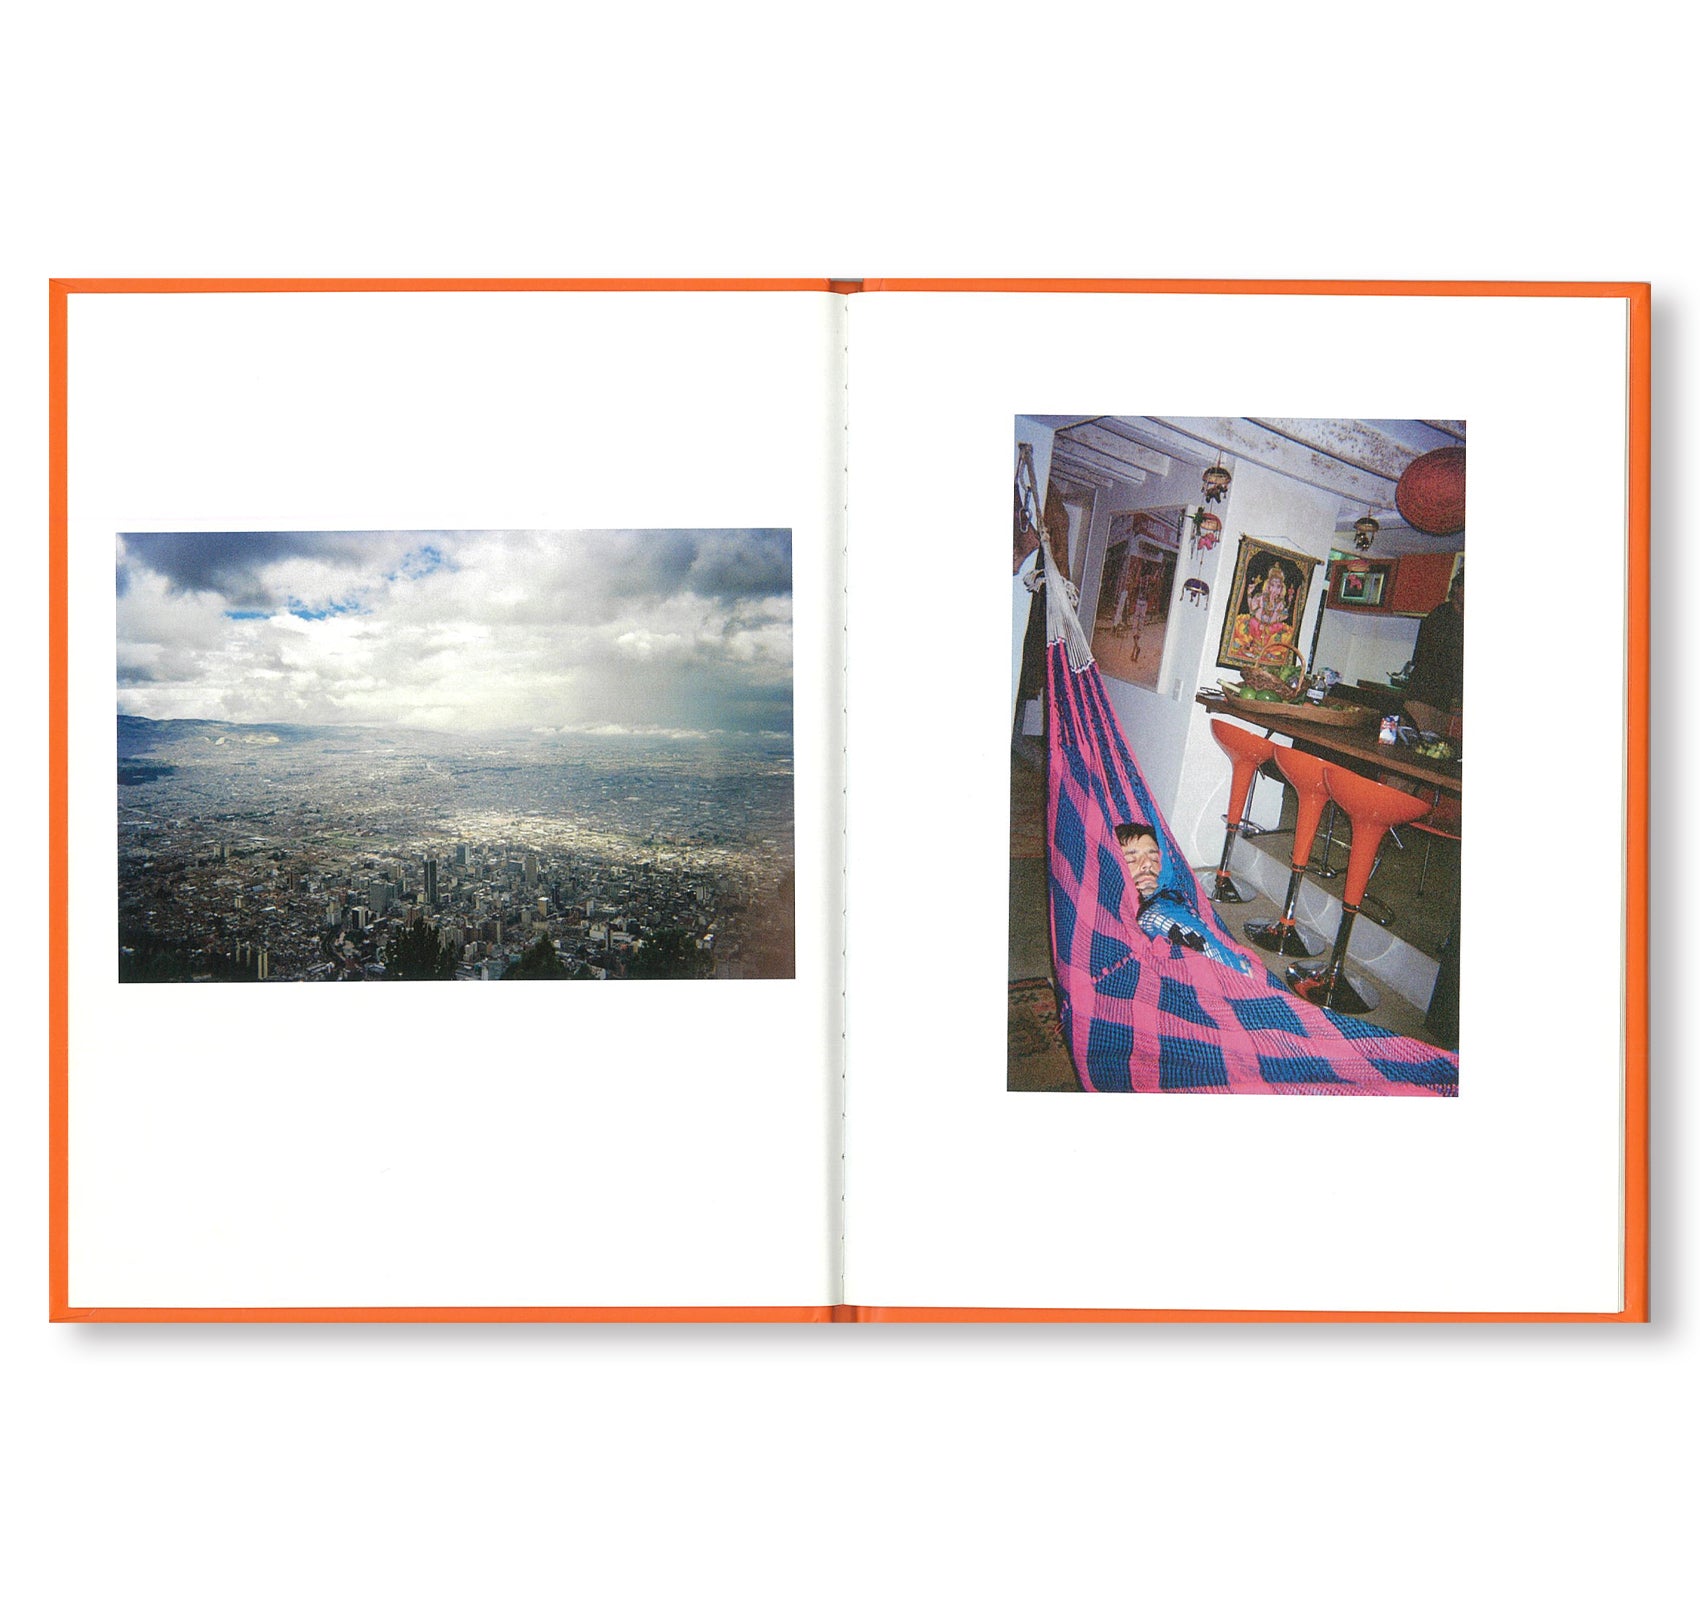 ONE PICTURE BOOK #88: BOGOTÁ FUNSAVER by Alec Soth – twelvebooks